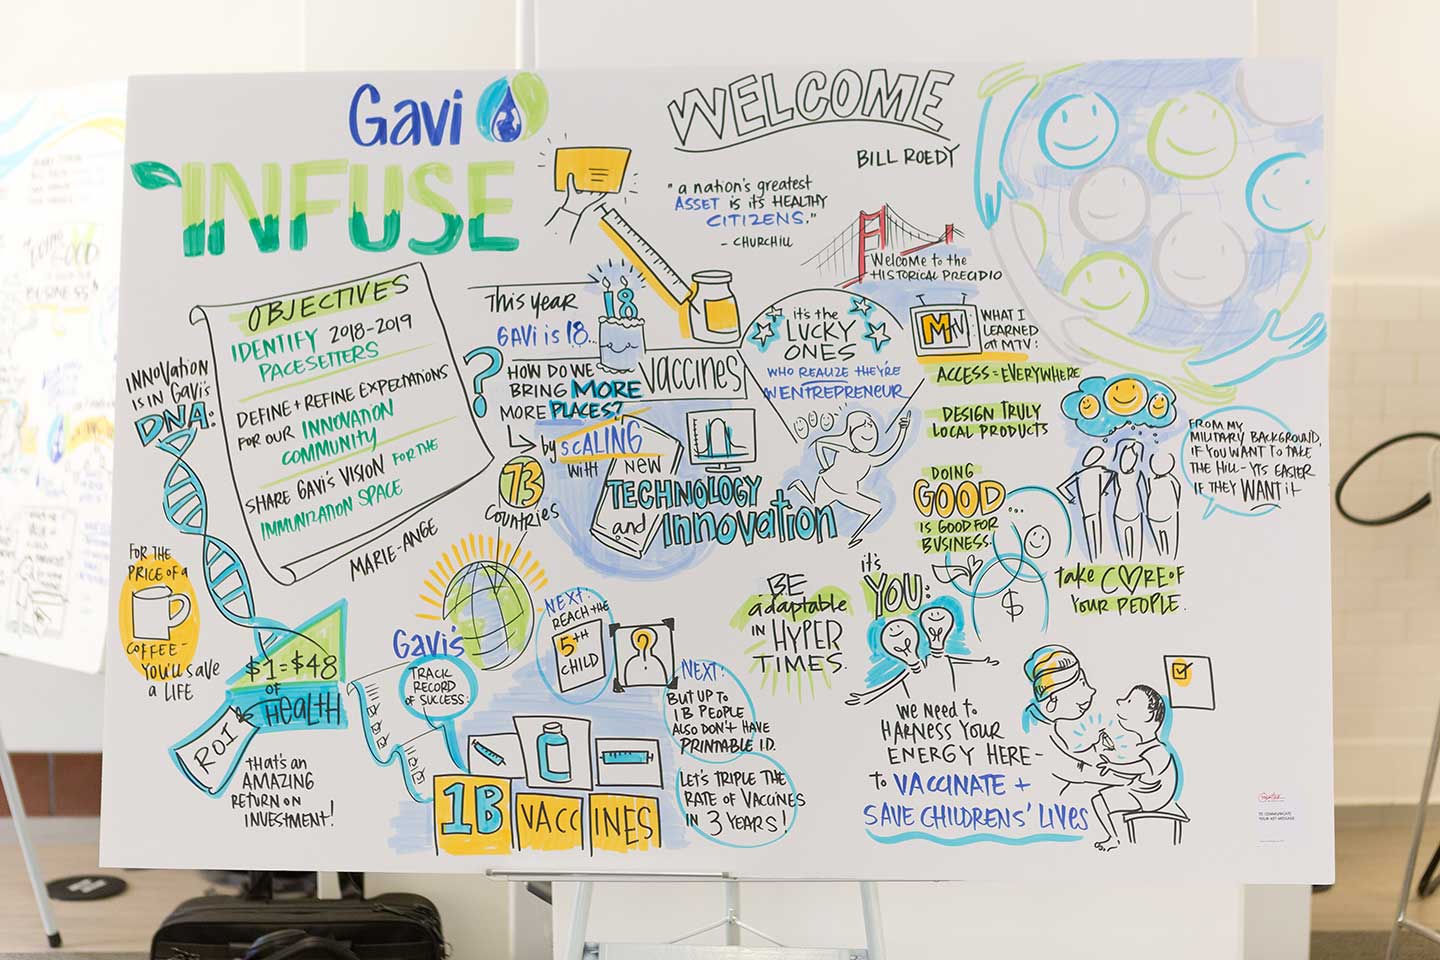 Highlights from Day 1 of the INFUSE workshop. Credit: Gavi/2018/Andrew Pau